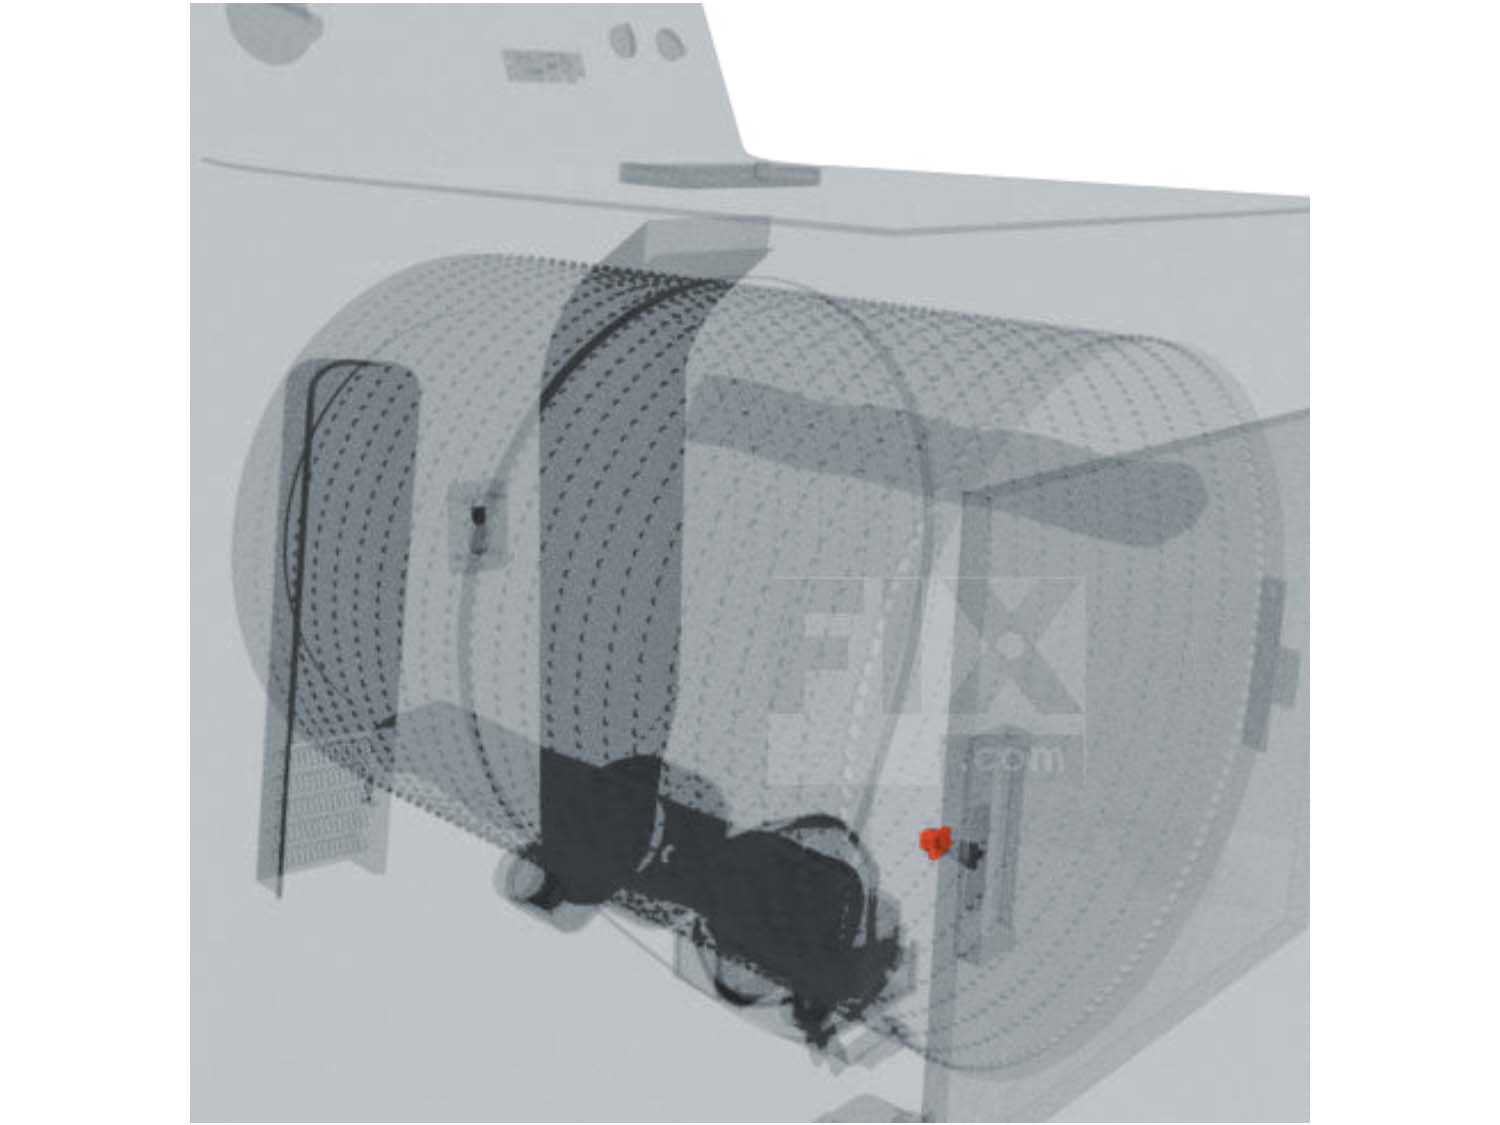 A 3D diagram showing the components of a dryer and specifying the location of the door catch